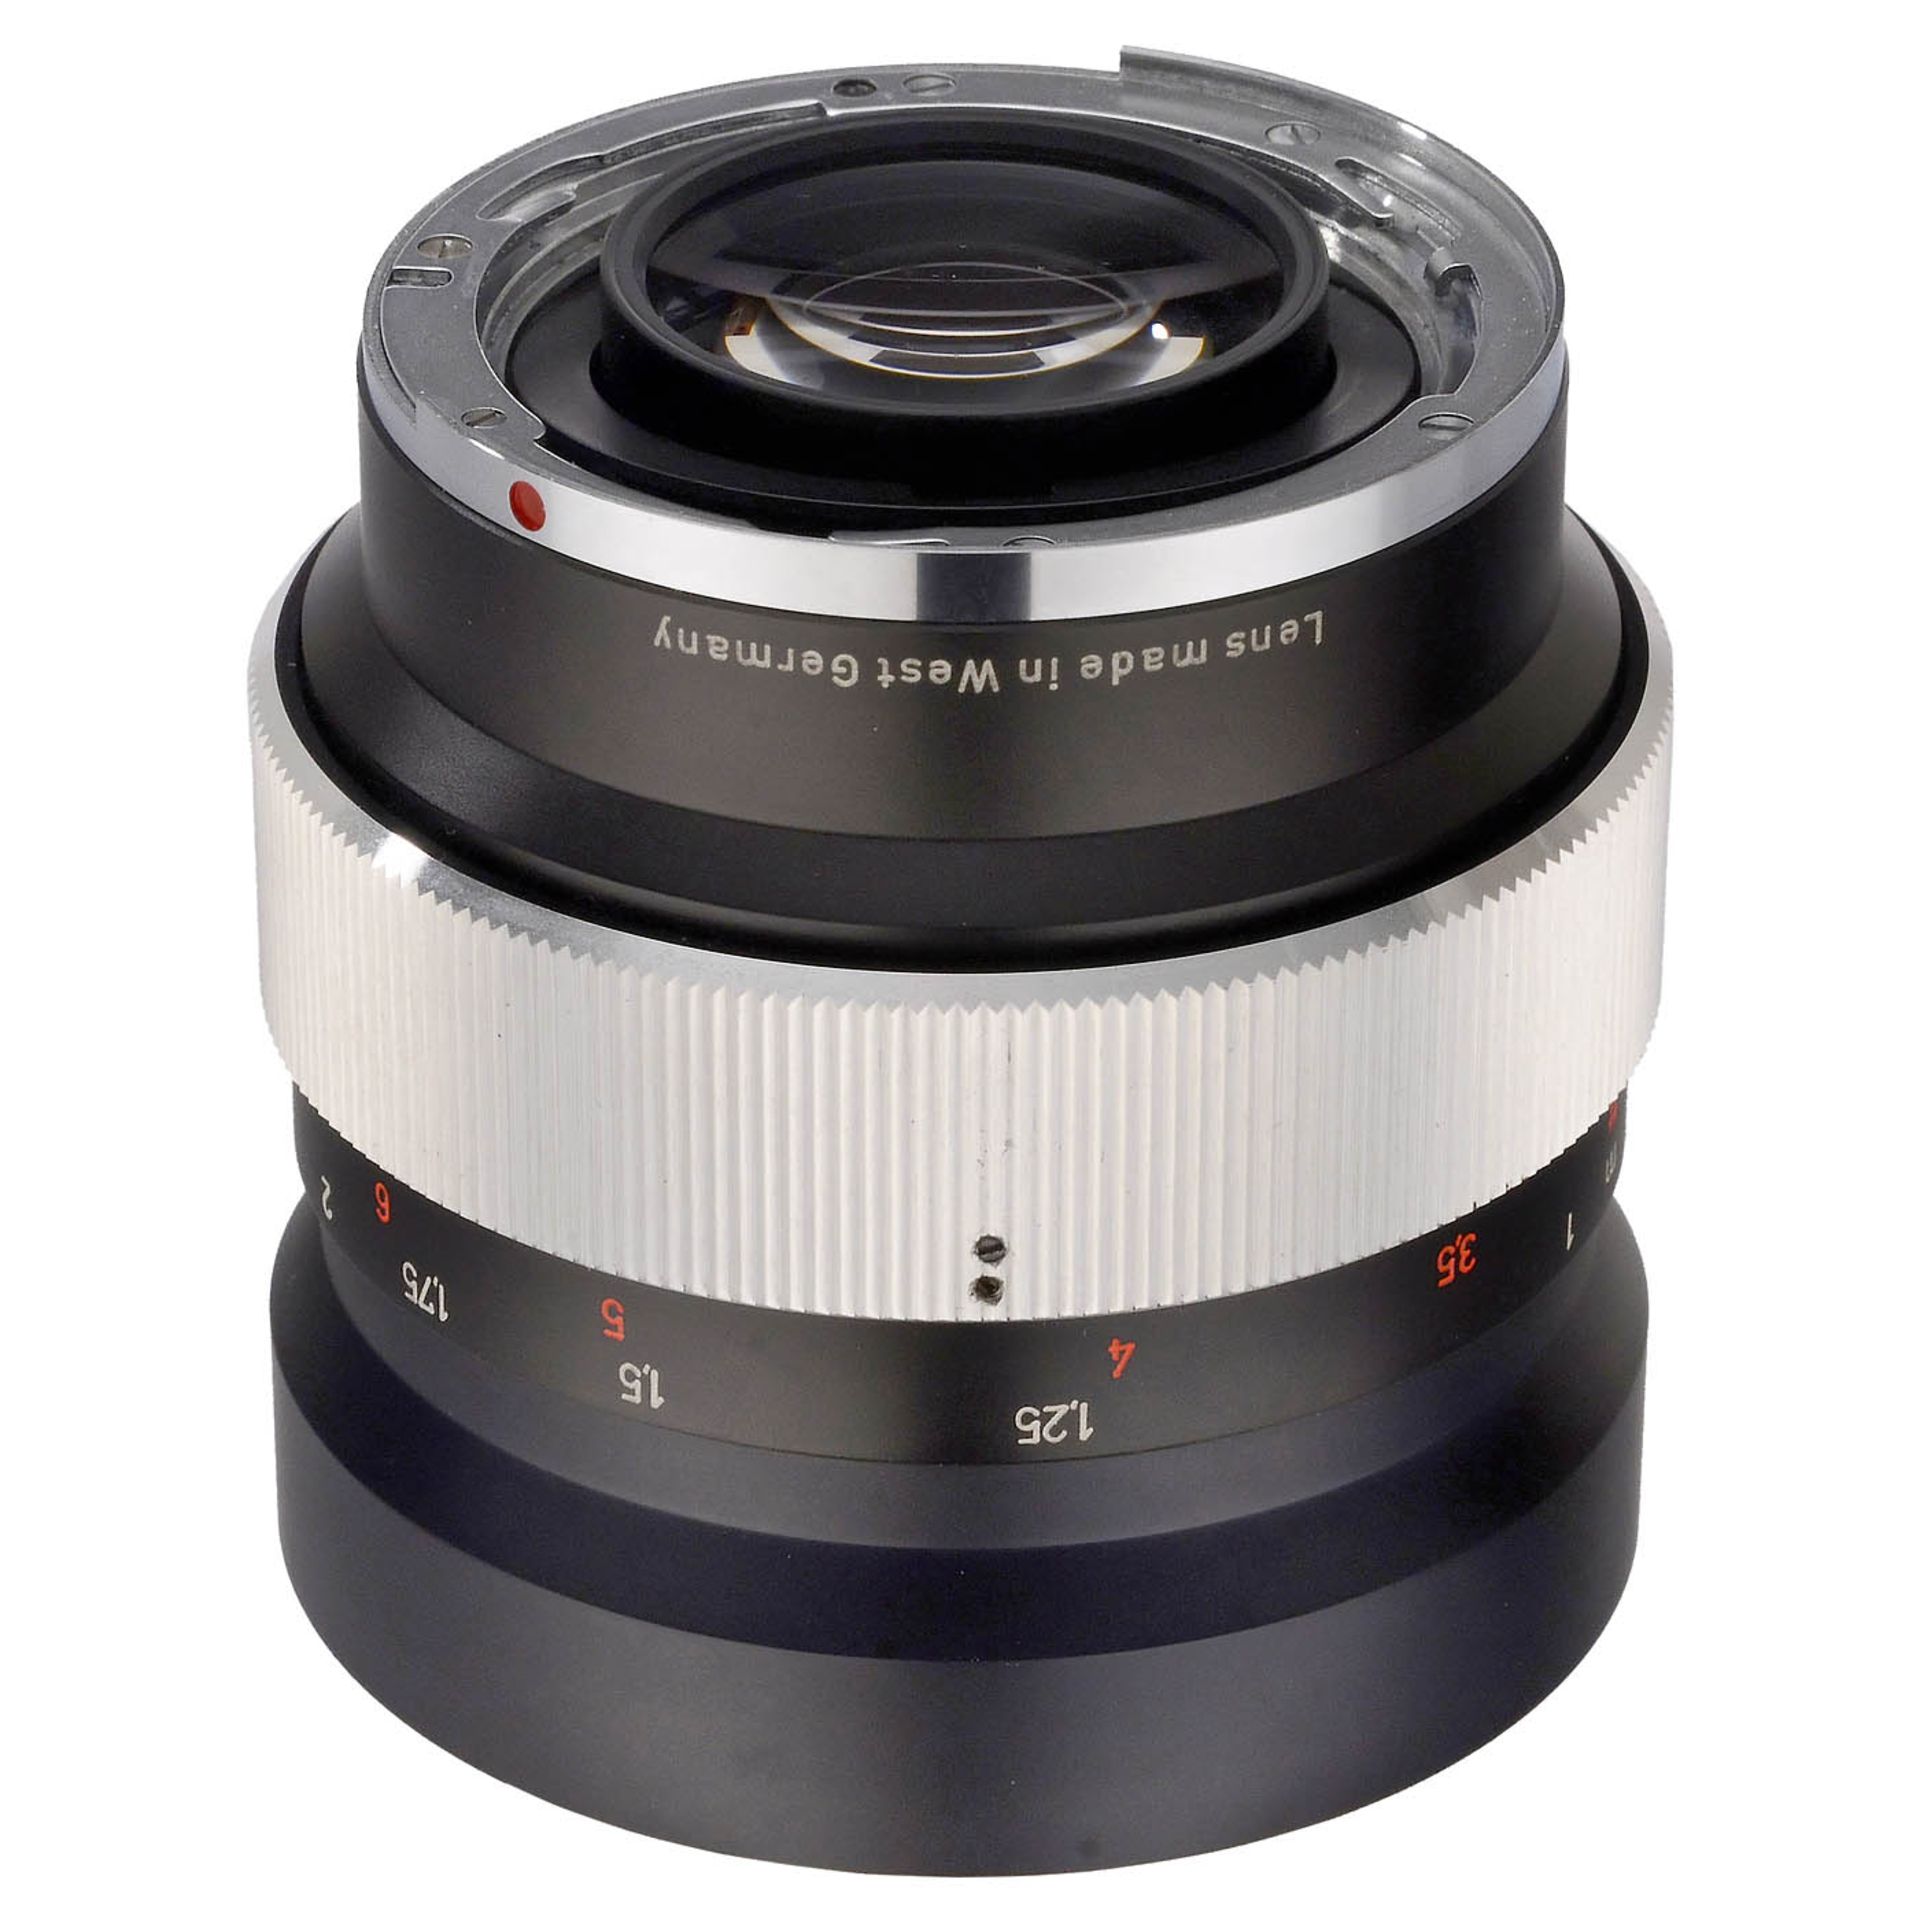 Planar 1.4/85 mm Lens for the Contarex - Image 3 of 3